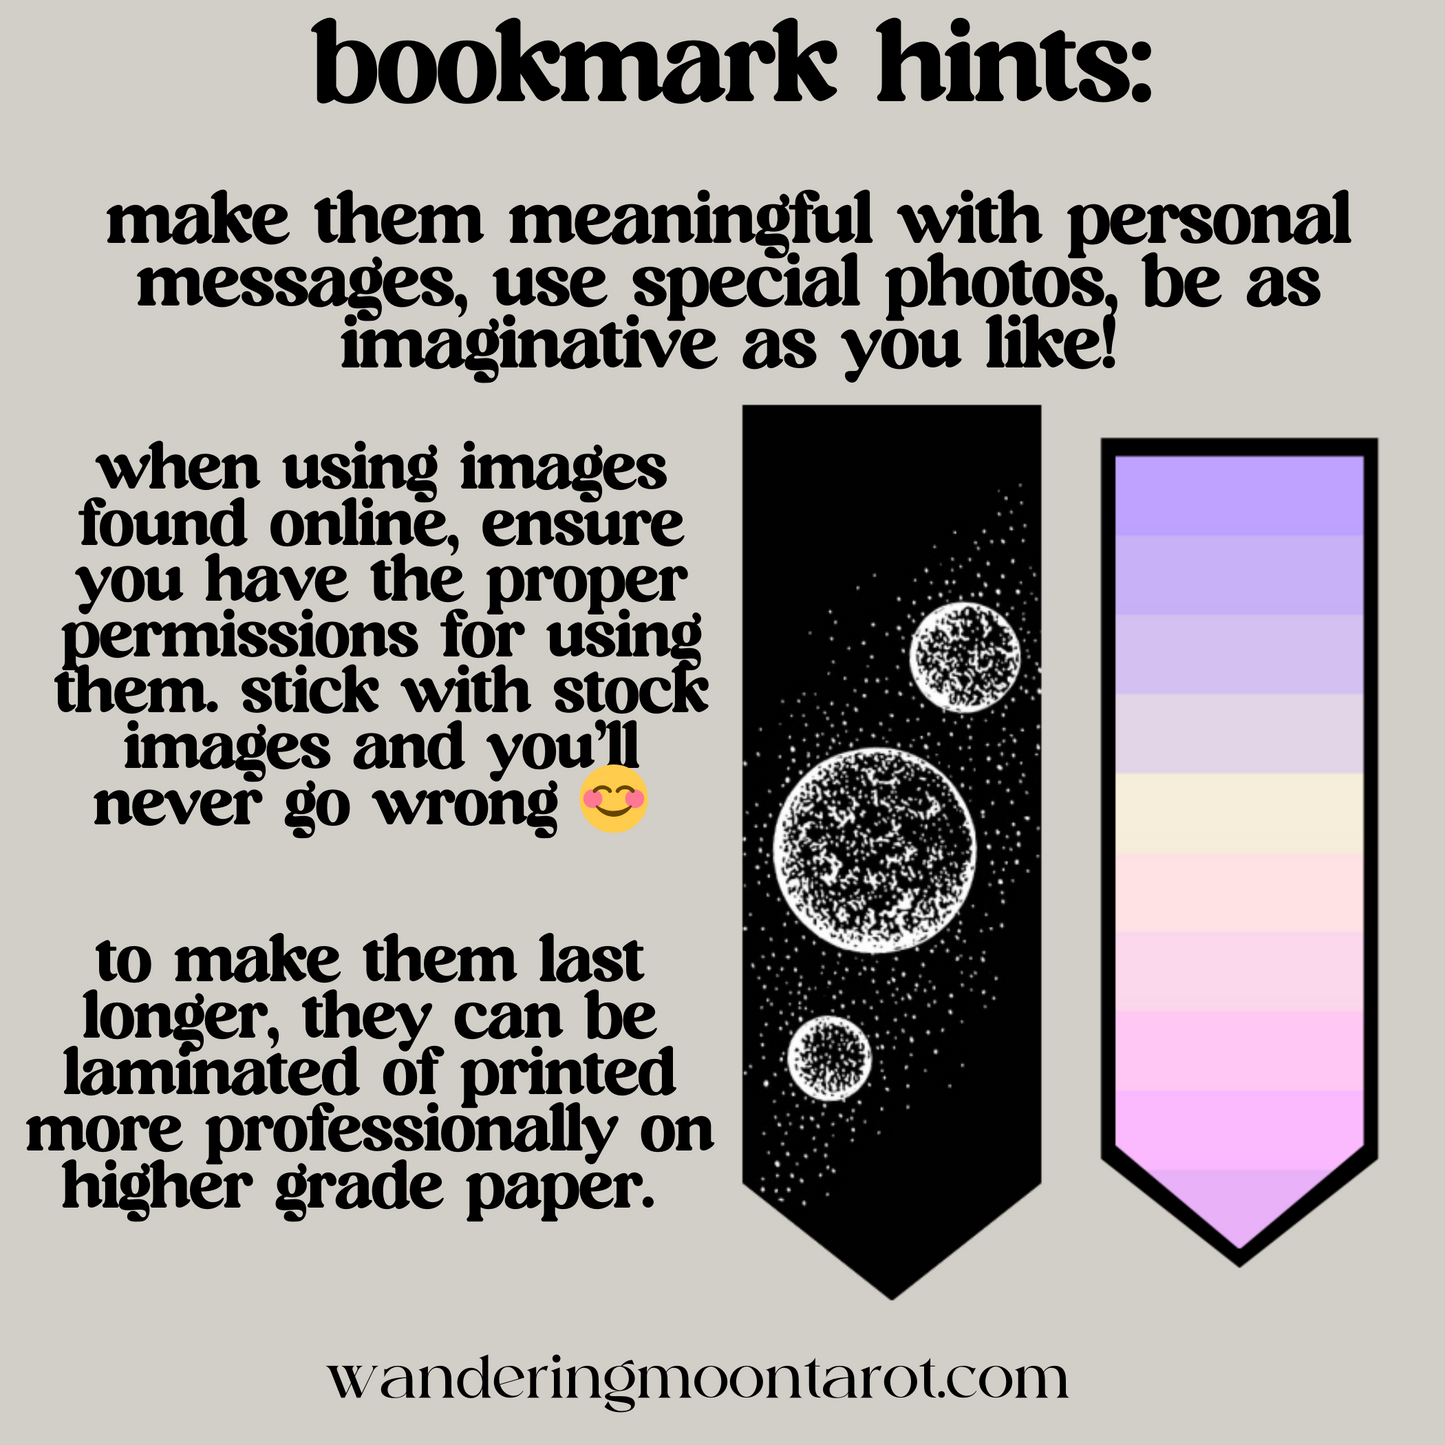 canva template: bookmarks, diy, crafting